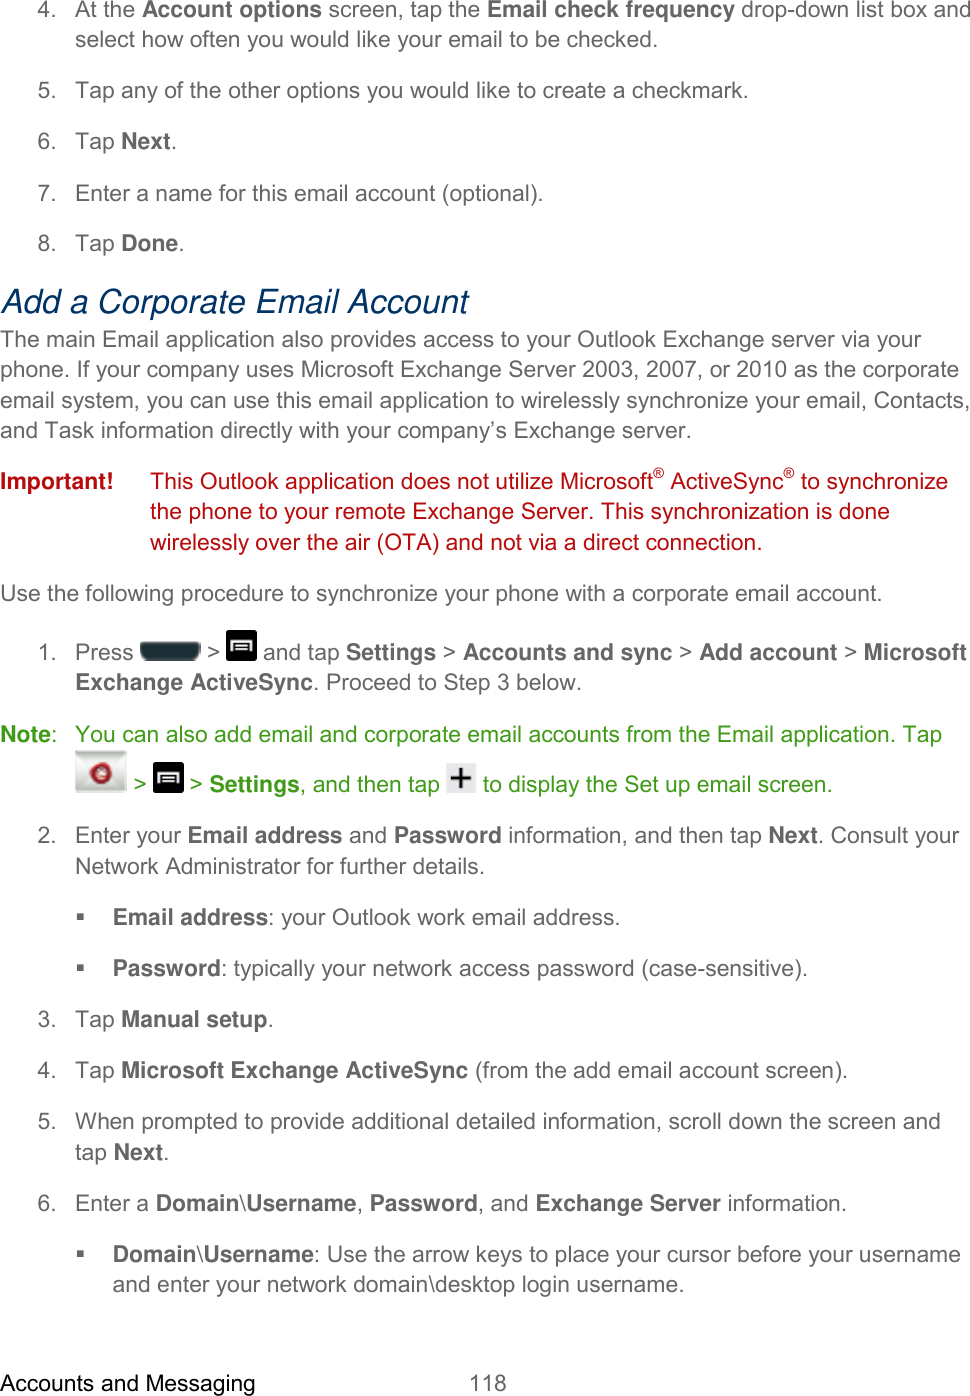 Accounts and Messaging 118   4.  At the Account options screen, tap the Email check frequency drop-down list box and select how often you would like your email to be checked. 5.  Tap any of the other options you would like to create a checkmark. 6.  Tap Next. 7.  Enter a name for this email account (optional). 8.  Tap Done. Add a Corporate Email Account The main Email application also provides access to your Outlook Exchange server via your phone. If your company uses Microsoft Exchange Server 2003, 2007, or 2010 as the corporate email system, you can use this email application to wirelessly synchronize your email, Contacts, and Task information directly with your company’s Exchange server. Important!   This Outlook application does not utilize Microsoft® ActiveSync® to synchronize the phone to your remote Exchange Server. This synchronization is done wirelessly over the air (OTA) and not via a direct connection. Use the following procedure to synchronize your phone with a corporate email account.  1.  Press   &gt;   and tap Settings &gt; Accounts and sync &gt; Add account &gt; Microsoft Exchange ActiveSync. Proceed to Step 3 below. Note:   You can also add email and corporate email accounts from the Email application. Tap  &gt;   &gt; Settings, and then tap   to display the Set up email screen. 2.  Enter your Email address and Password information, and then tap Next. Consult your Network Administrator for further details.  Email address: your Outlook work email address.  Password: typically your network access password (case-sensitive). 3.  Tap Manual setup. 4.  Tap Microsoft Exchange ActiveSync (from the add email account screen). 5.  When prompted to provide additional detailed information, scroll down the screen and tap Next. 6.  Enter a Domain\Username, Password, and Exchange Server information.   Domain\Username: Use the arrow keys to place your cursor before your username and enter your network domain\desktop login username. 